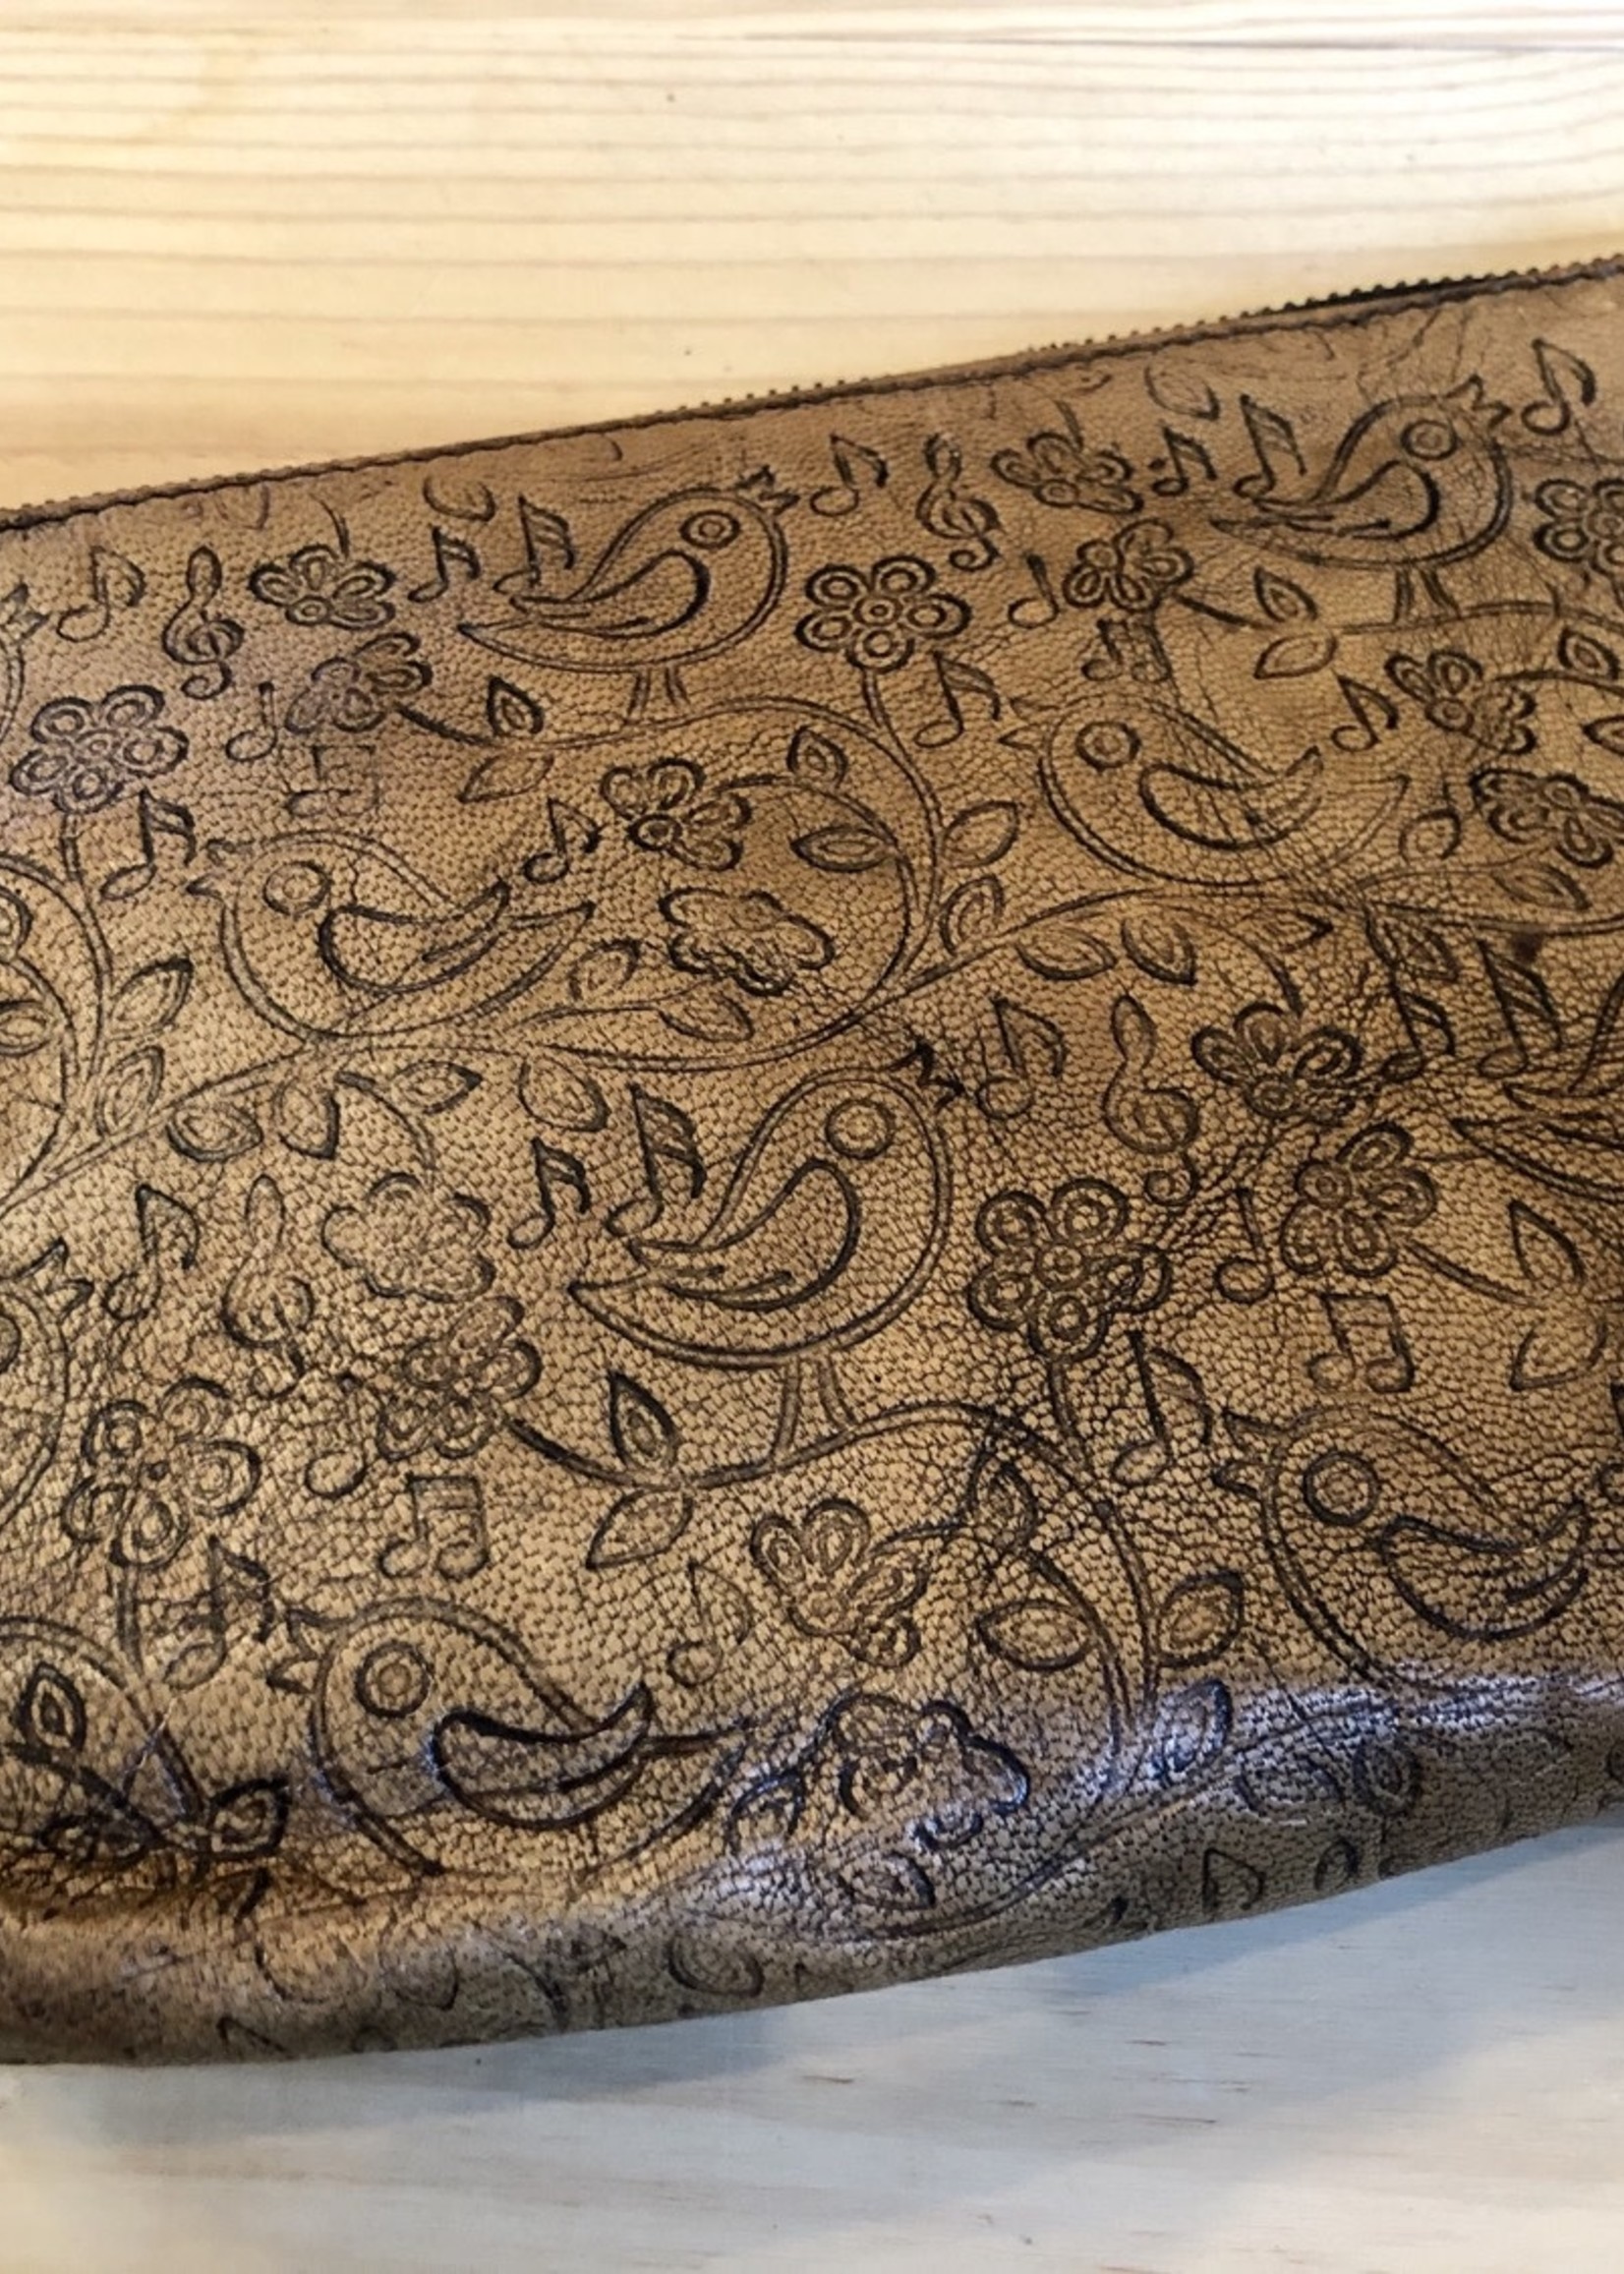 Hand-Tooled Leather Cosmetic Bag